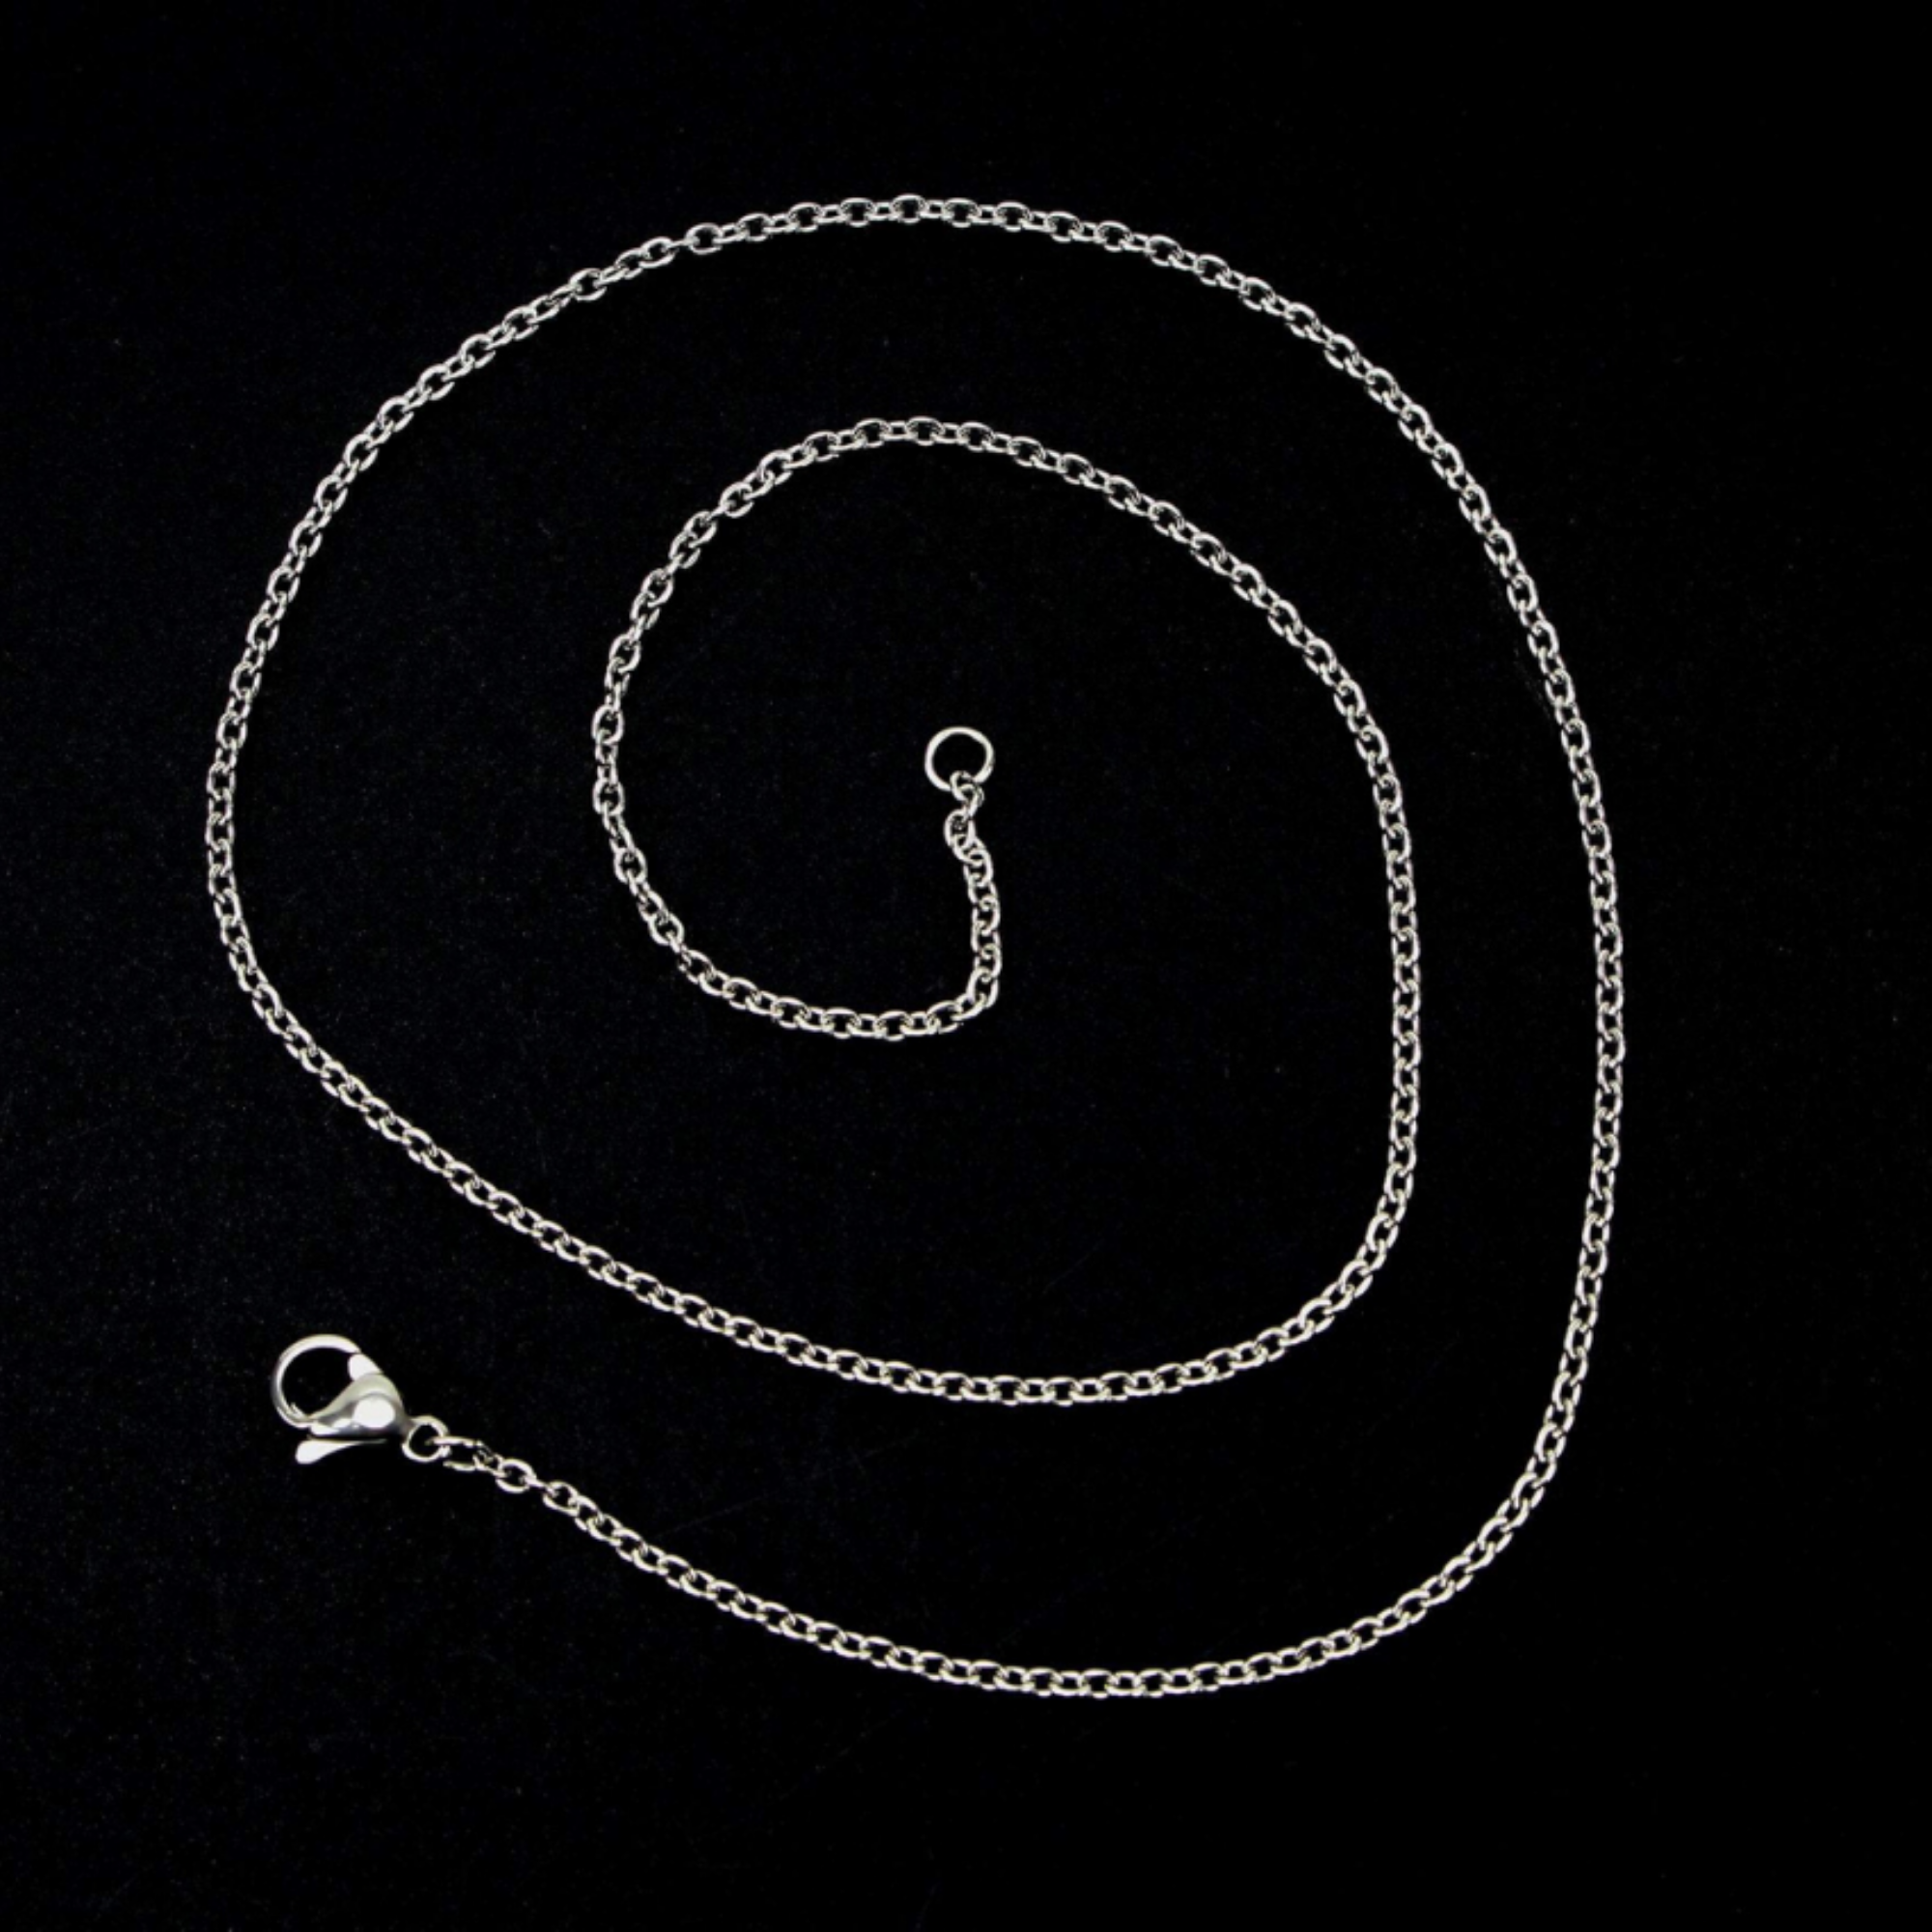 Stainless steel link cable chain necklace